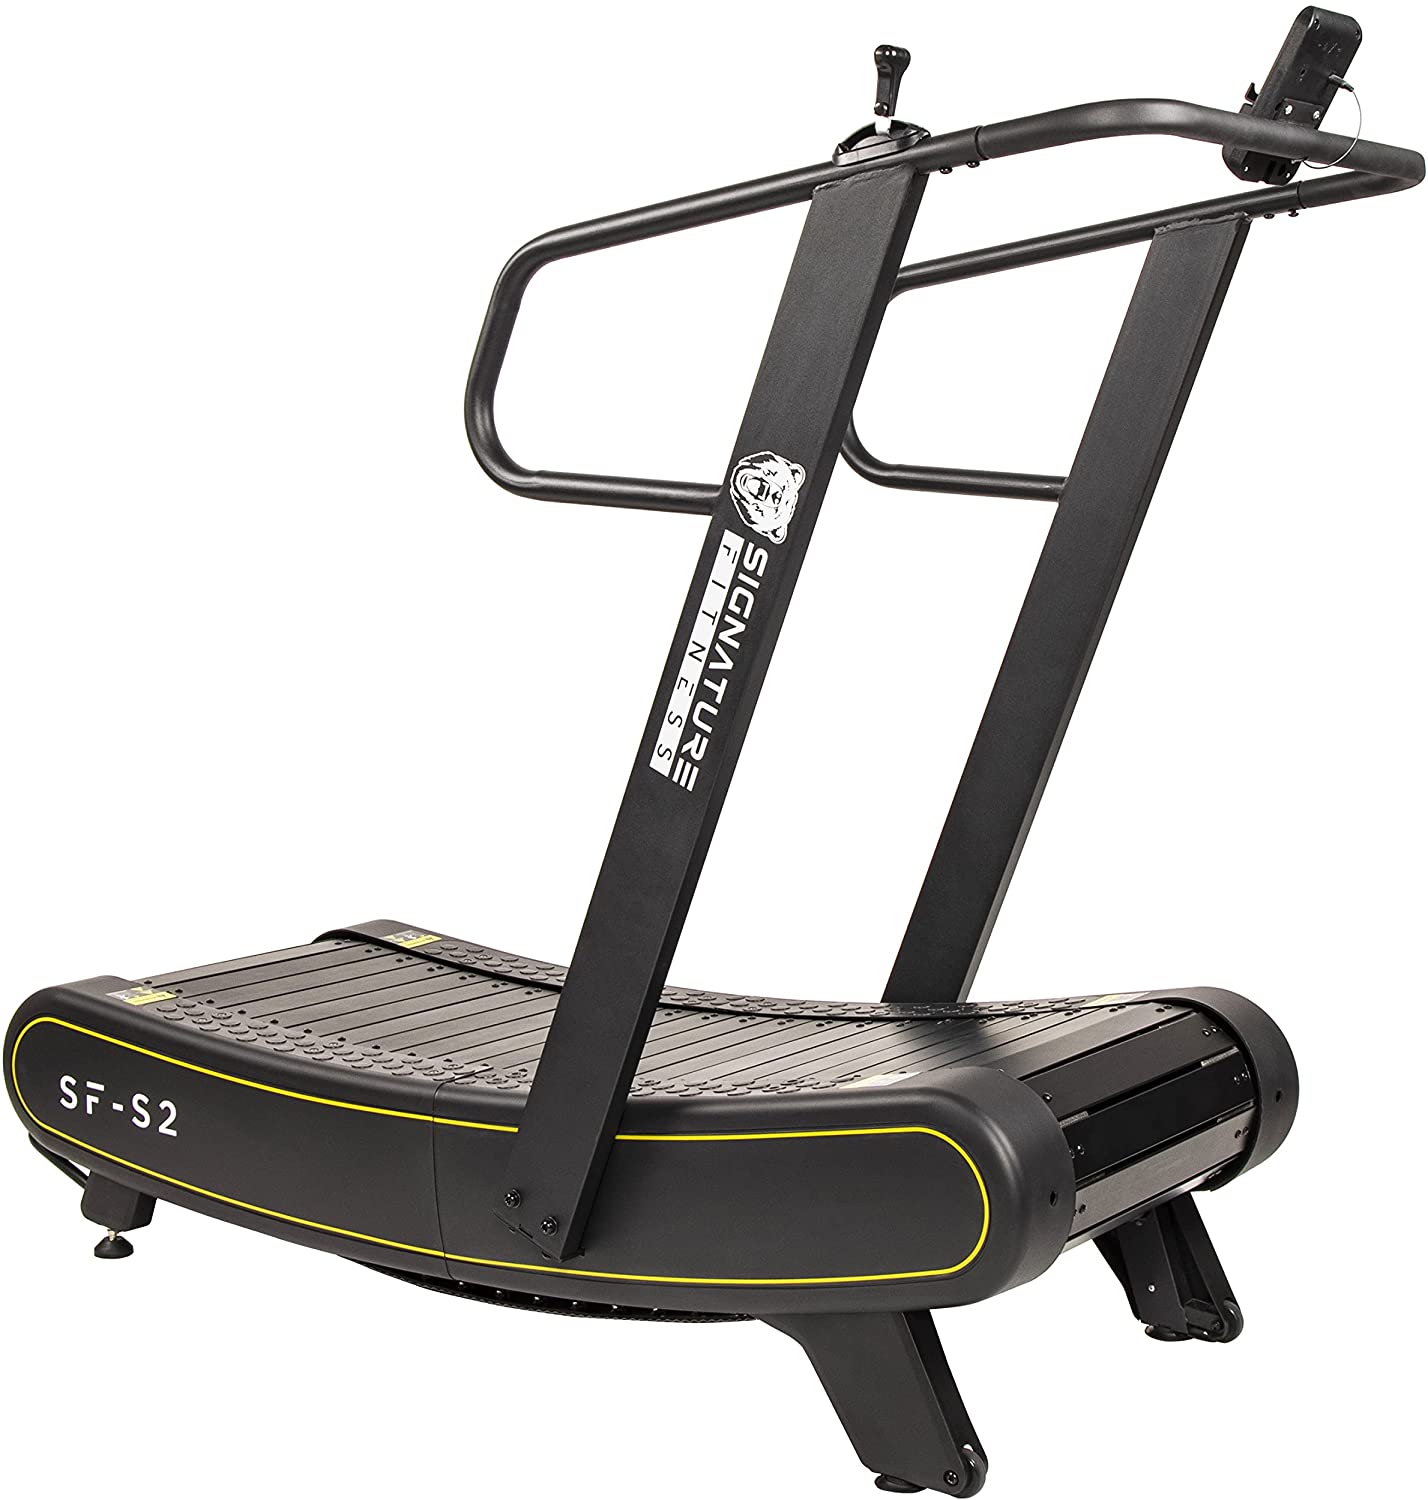 Signature Fitness SF-S2 Sprint Demon - Motorless Curved Sprint Treadmill with Adjustable Levels of Resistance - 300 lb Capacity - image 1 of 11